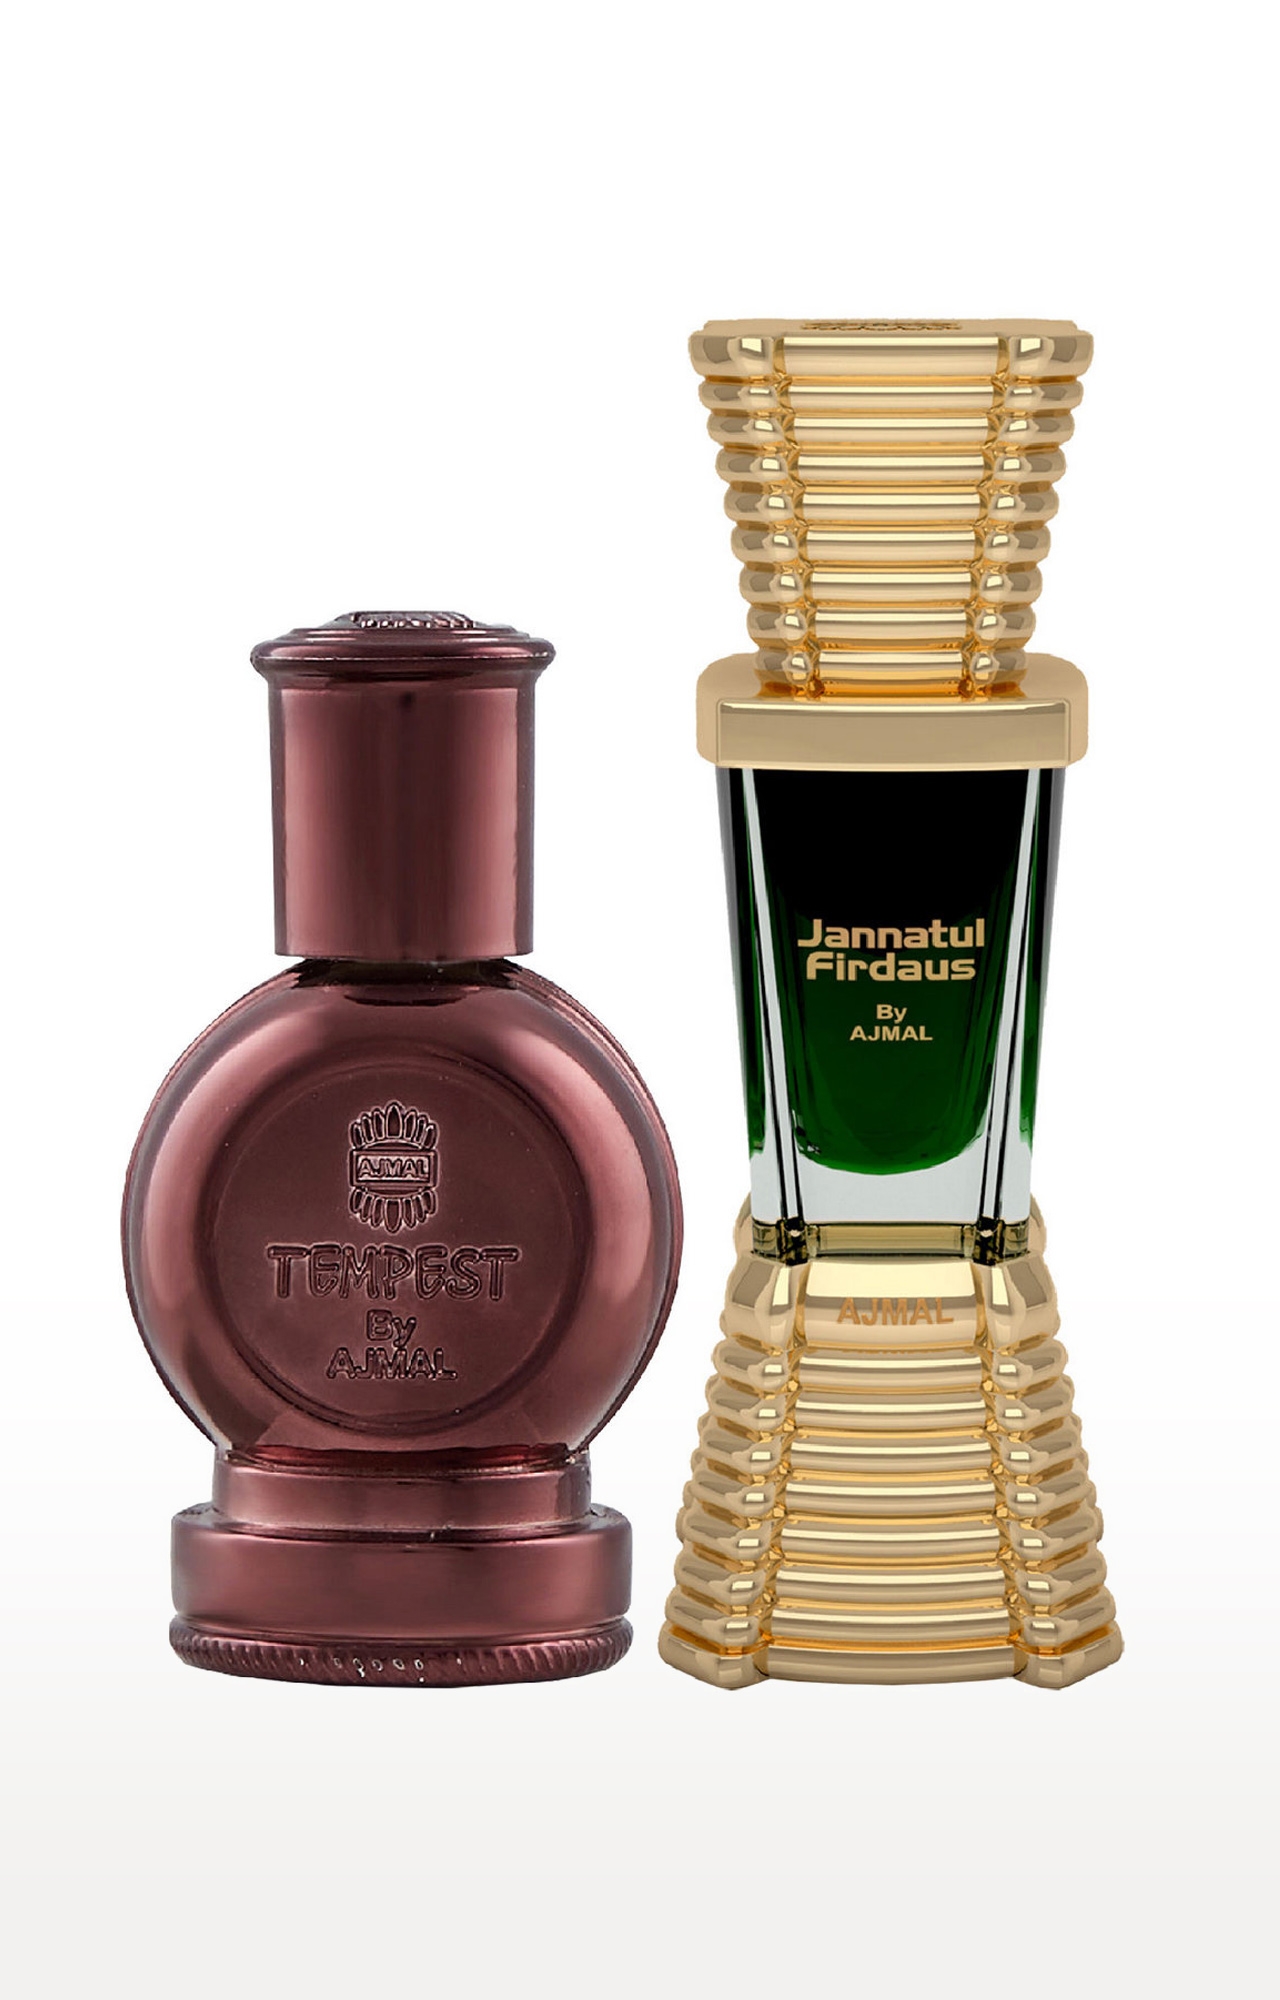 Ajmal | Ajmal Tempest Concentrated Perfume Oil Floral Alcohol-free Attar 12ml for Unisex and Jannatul Firdaus Concentrated Perfume Oil Oriental Alcohol-free Attar 10ml for Unisex + 2 Parfum Testers FREE